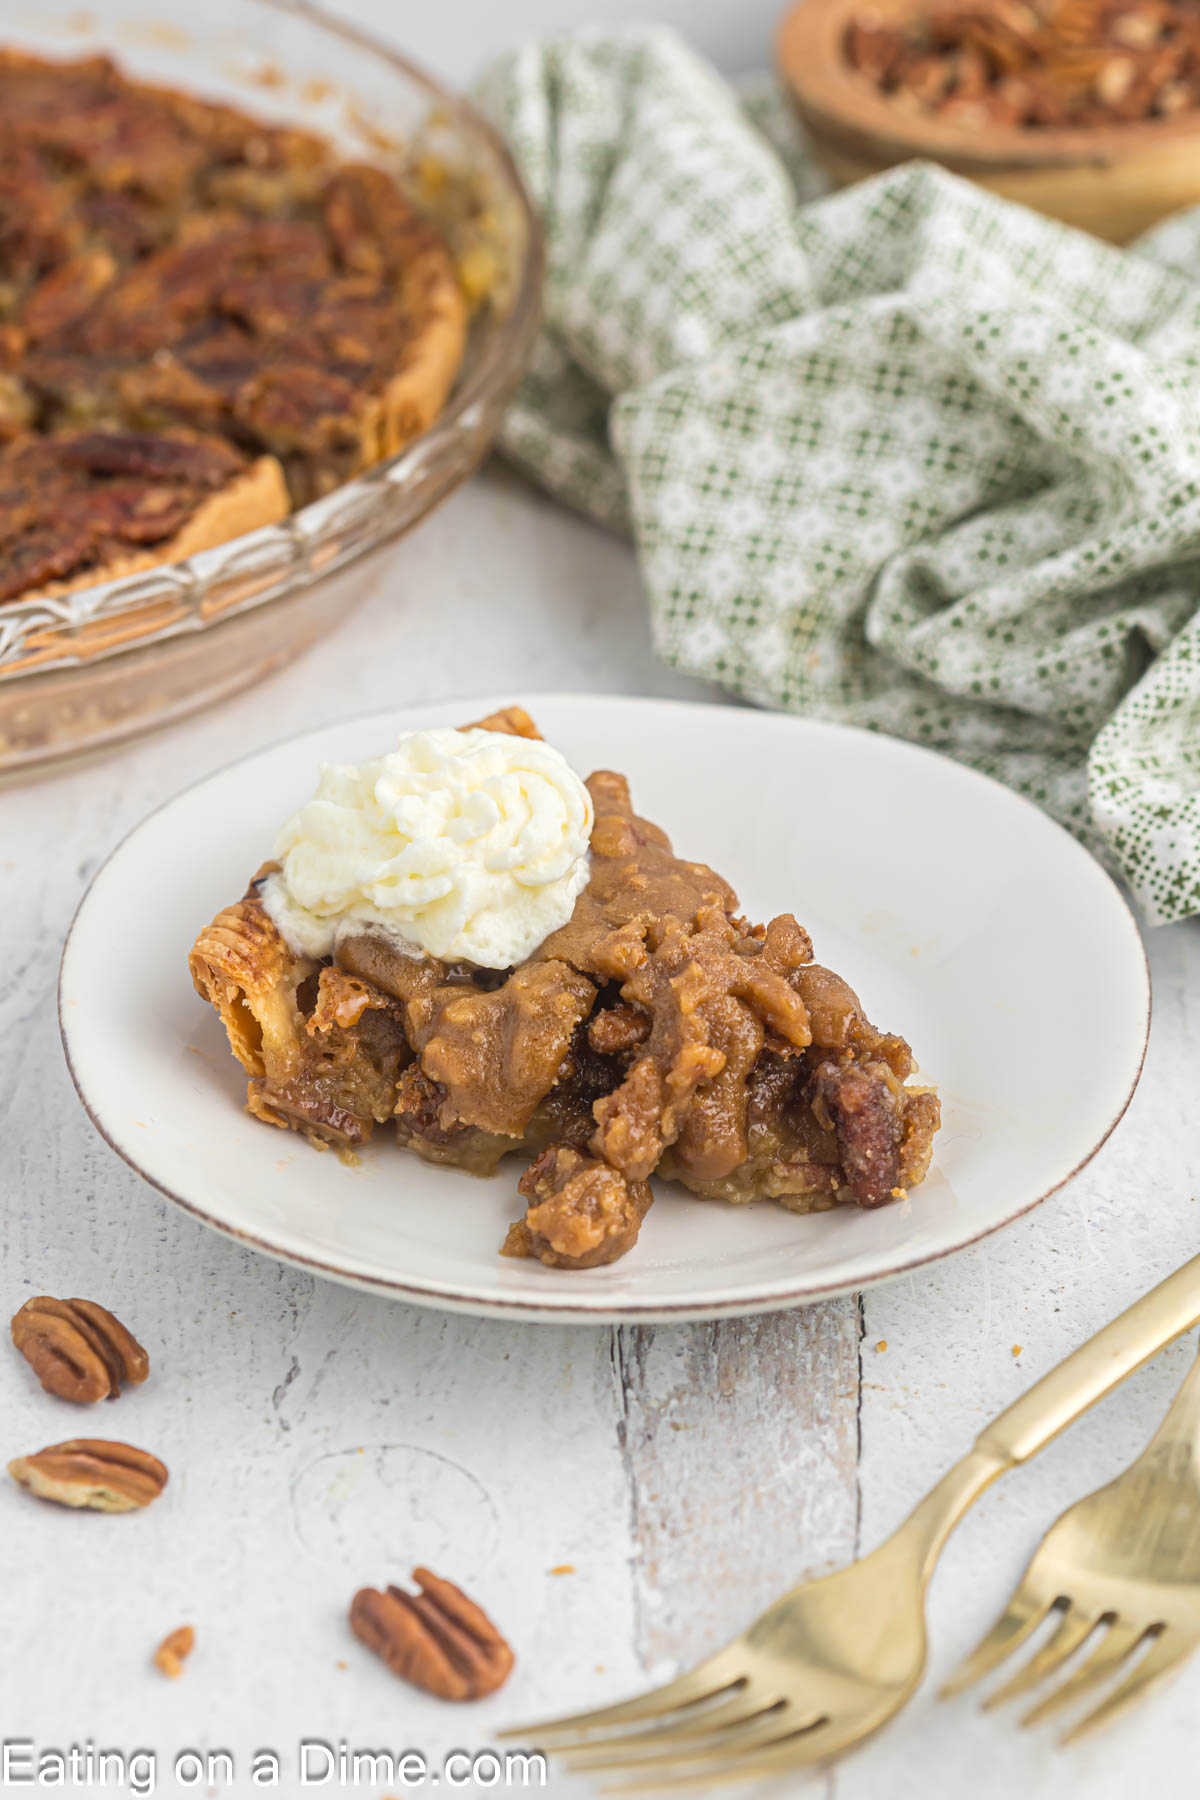 Slice of pecan pie on a plate with whipped cream